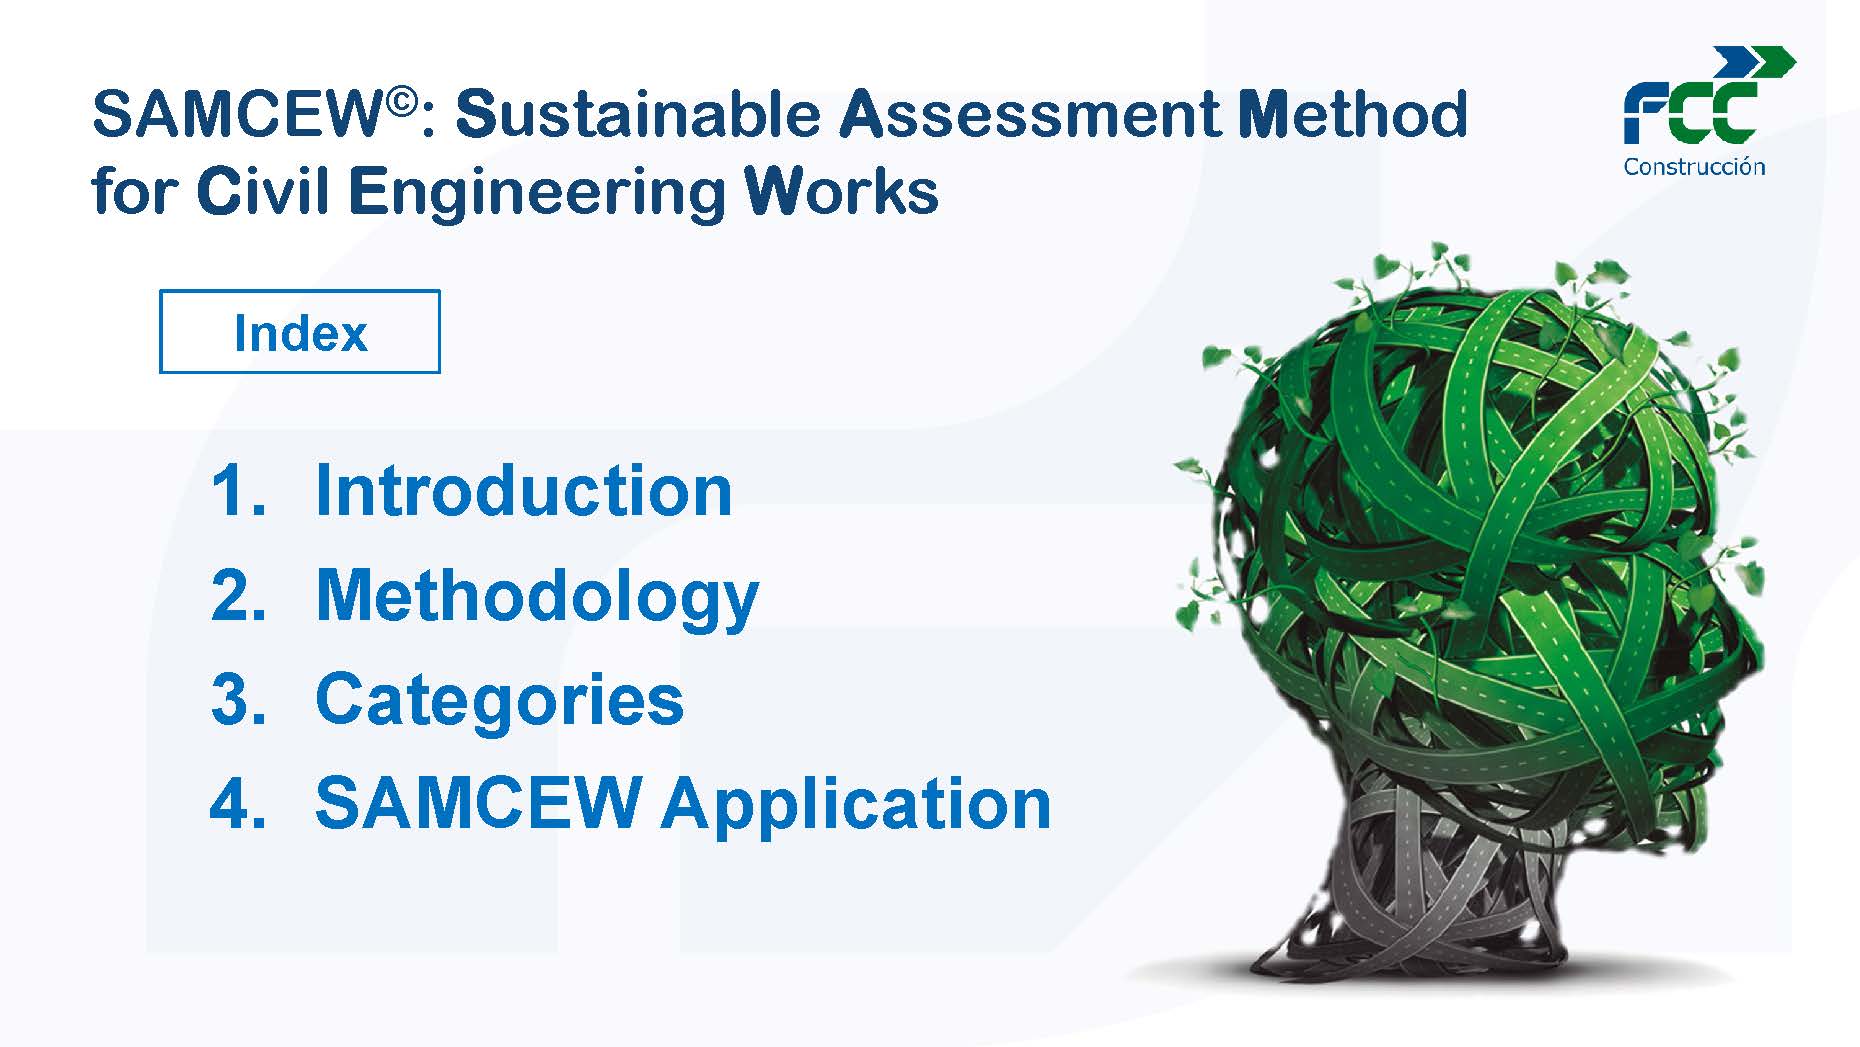 Sustainability assessment methodology in civil works (Opens PDF file in new tab)